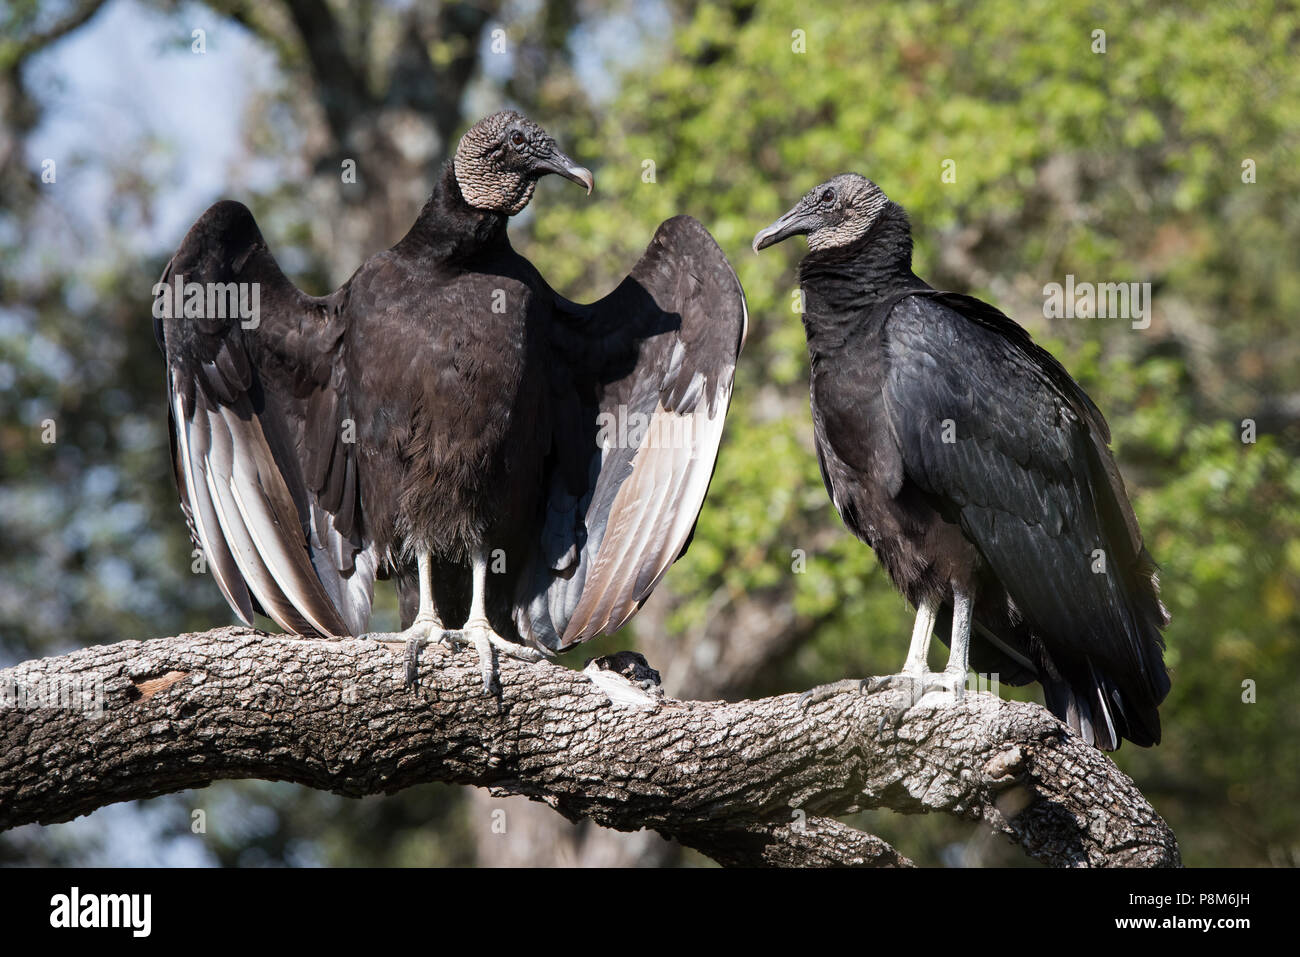 A pair of black vultures sunning themselves at McAllister Park in San Antonio, Texas. Stock Photo